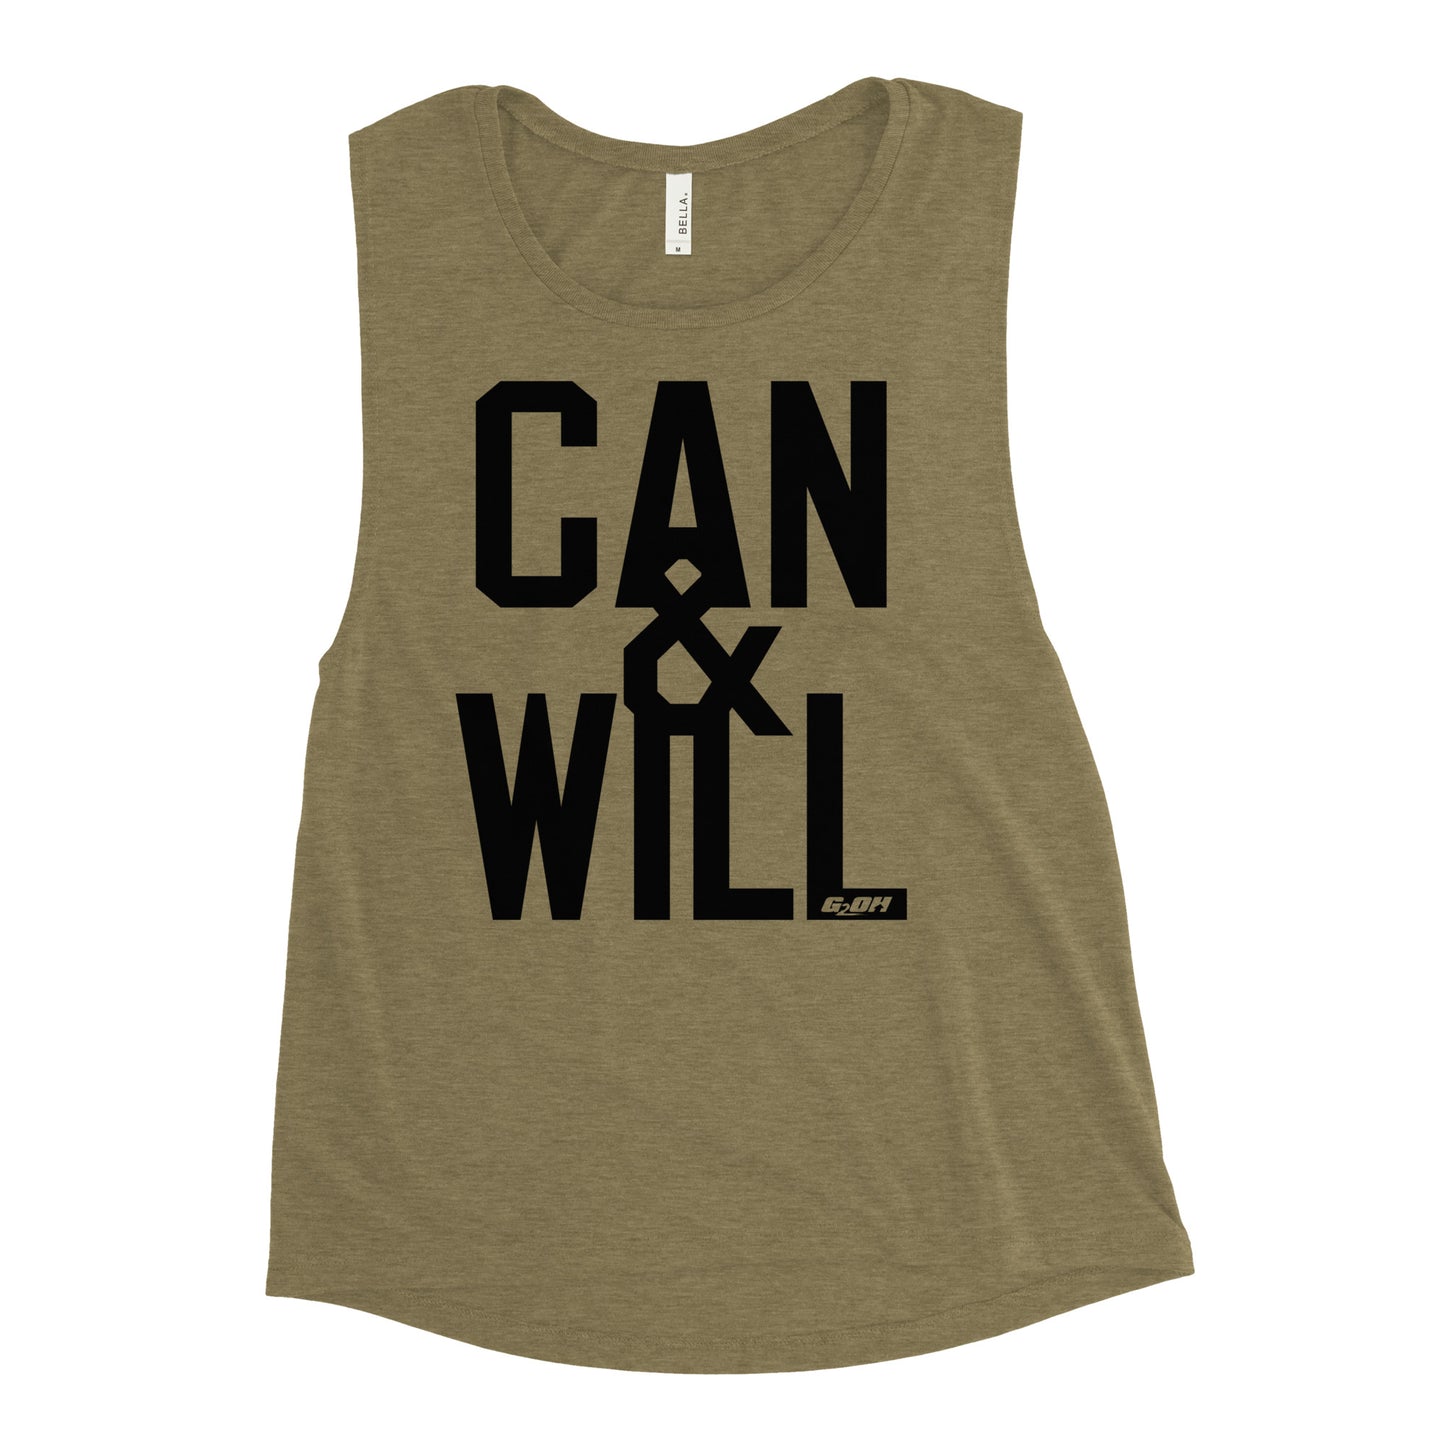 Can And Will Women's Muscle Tank